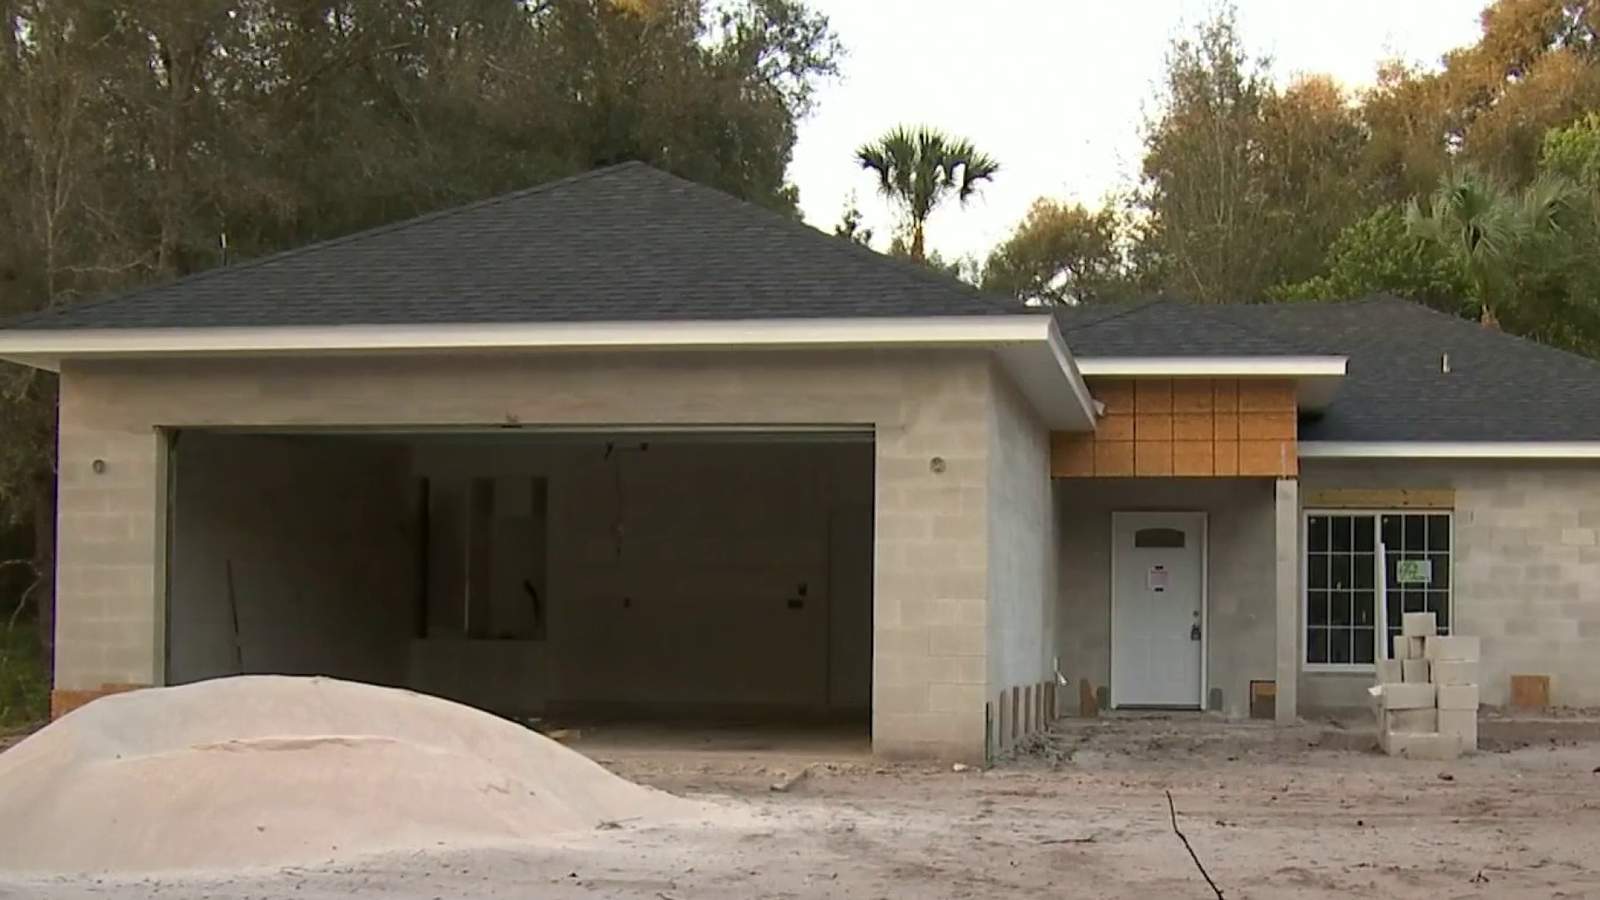 Uh Oh: Lake Helen home mistakenly built on city-owned land